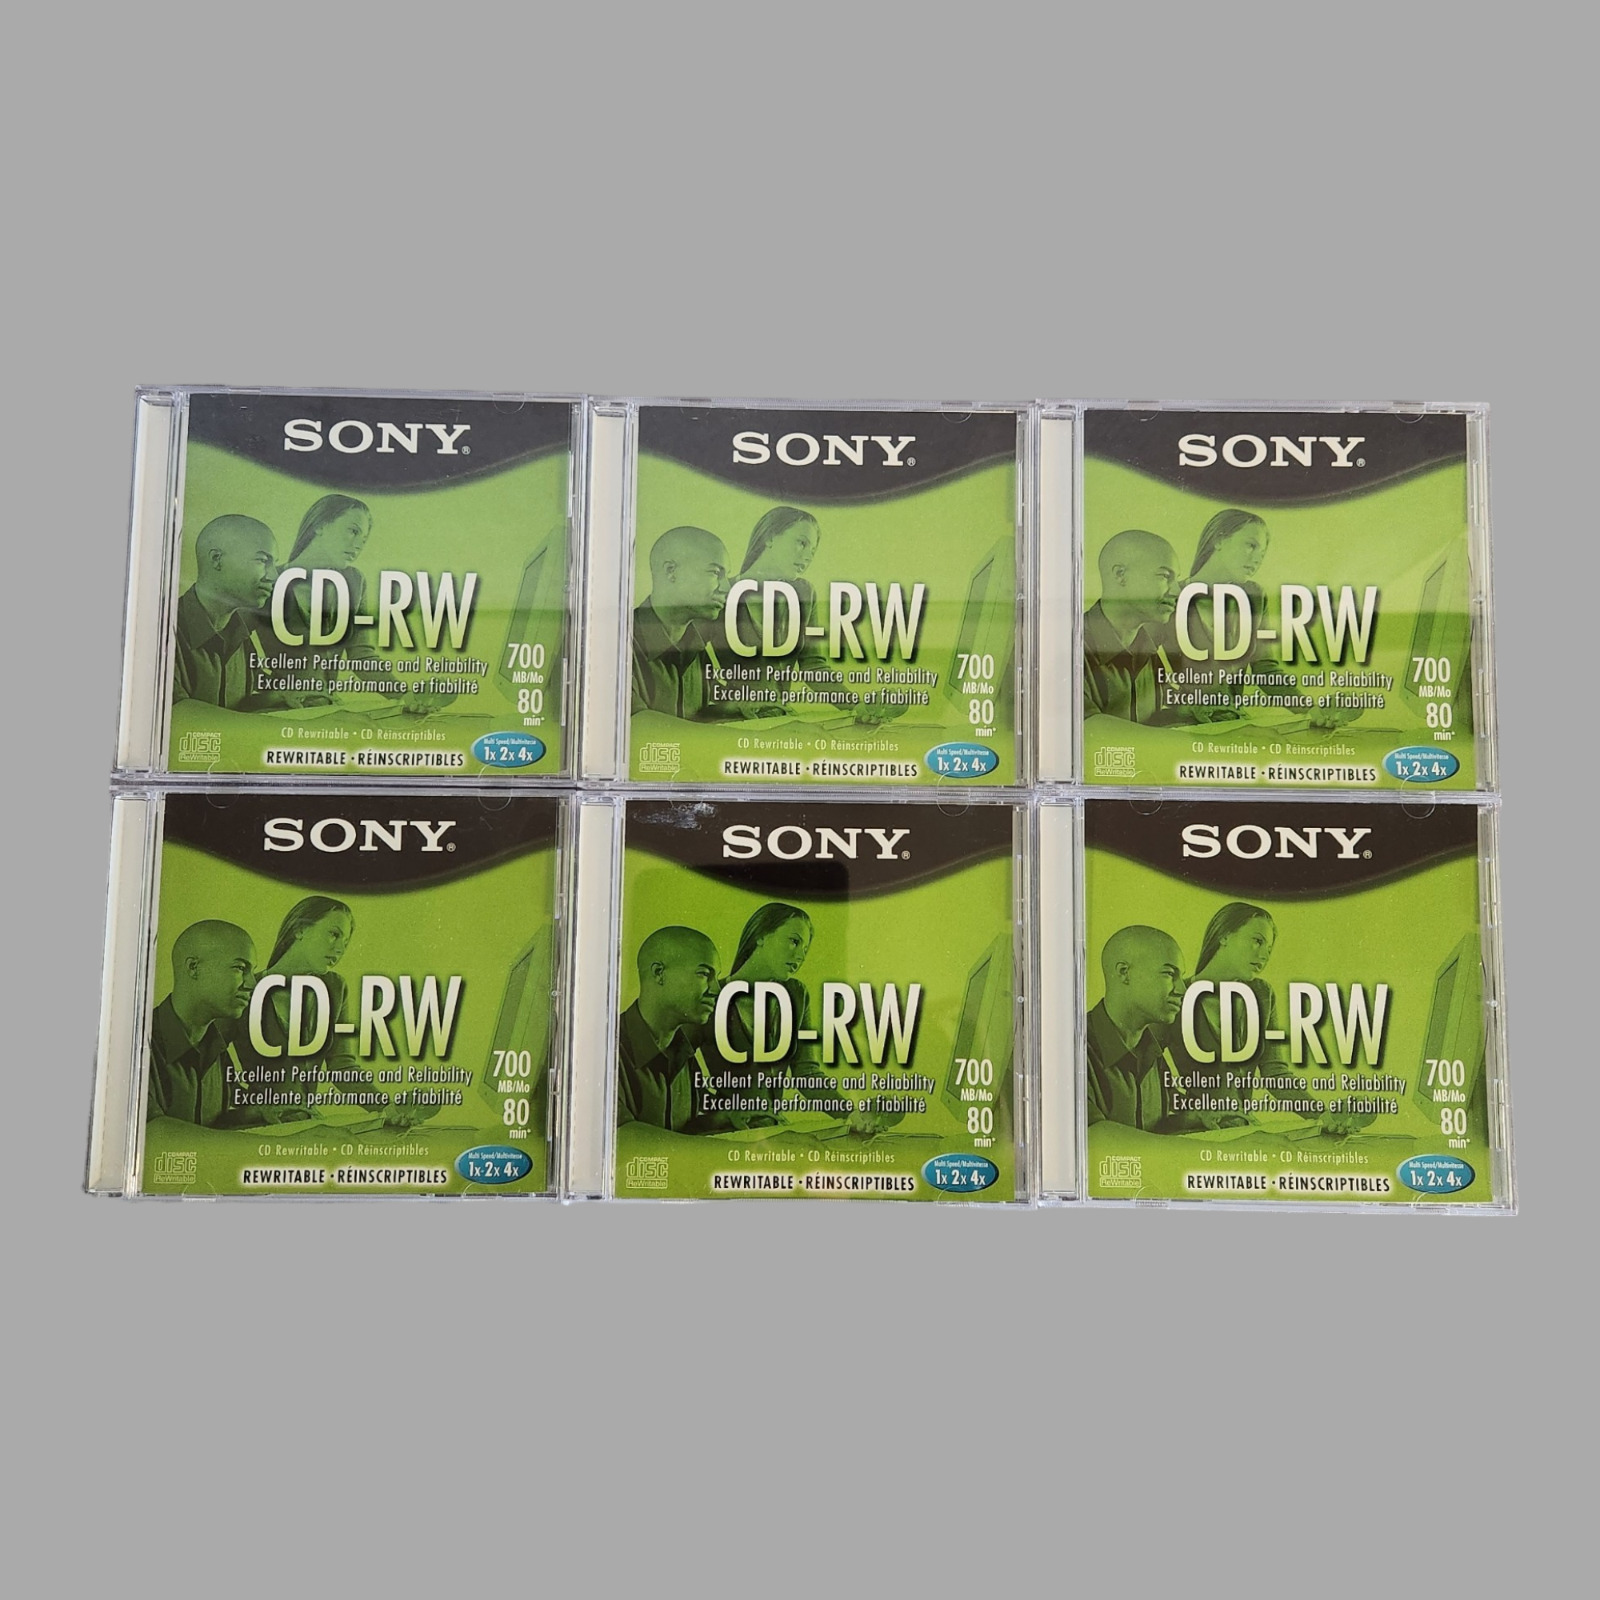 NEW Lot of 6 Sony CD-RW 700 MB 80 Min Rewritable Blank Discs Up To 4X Speed